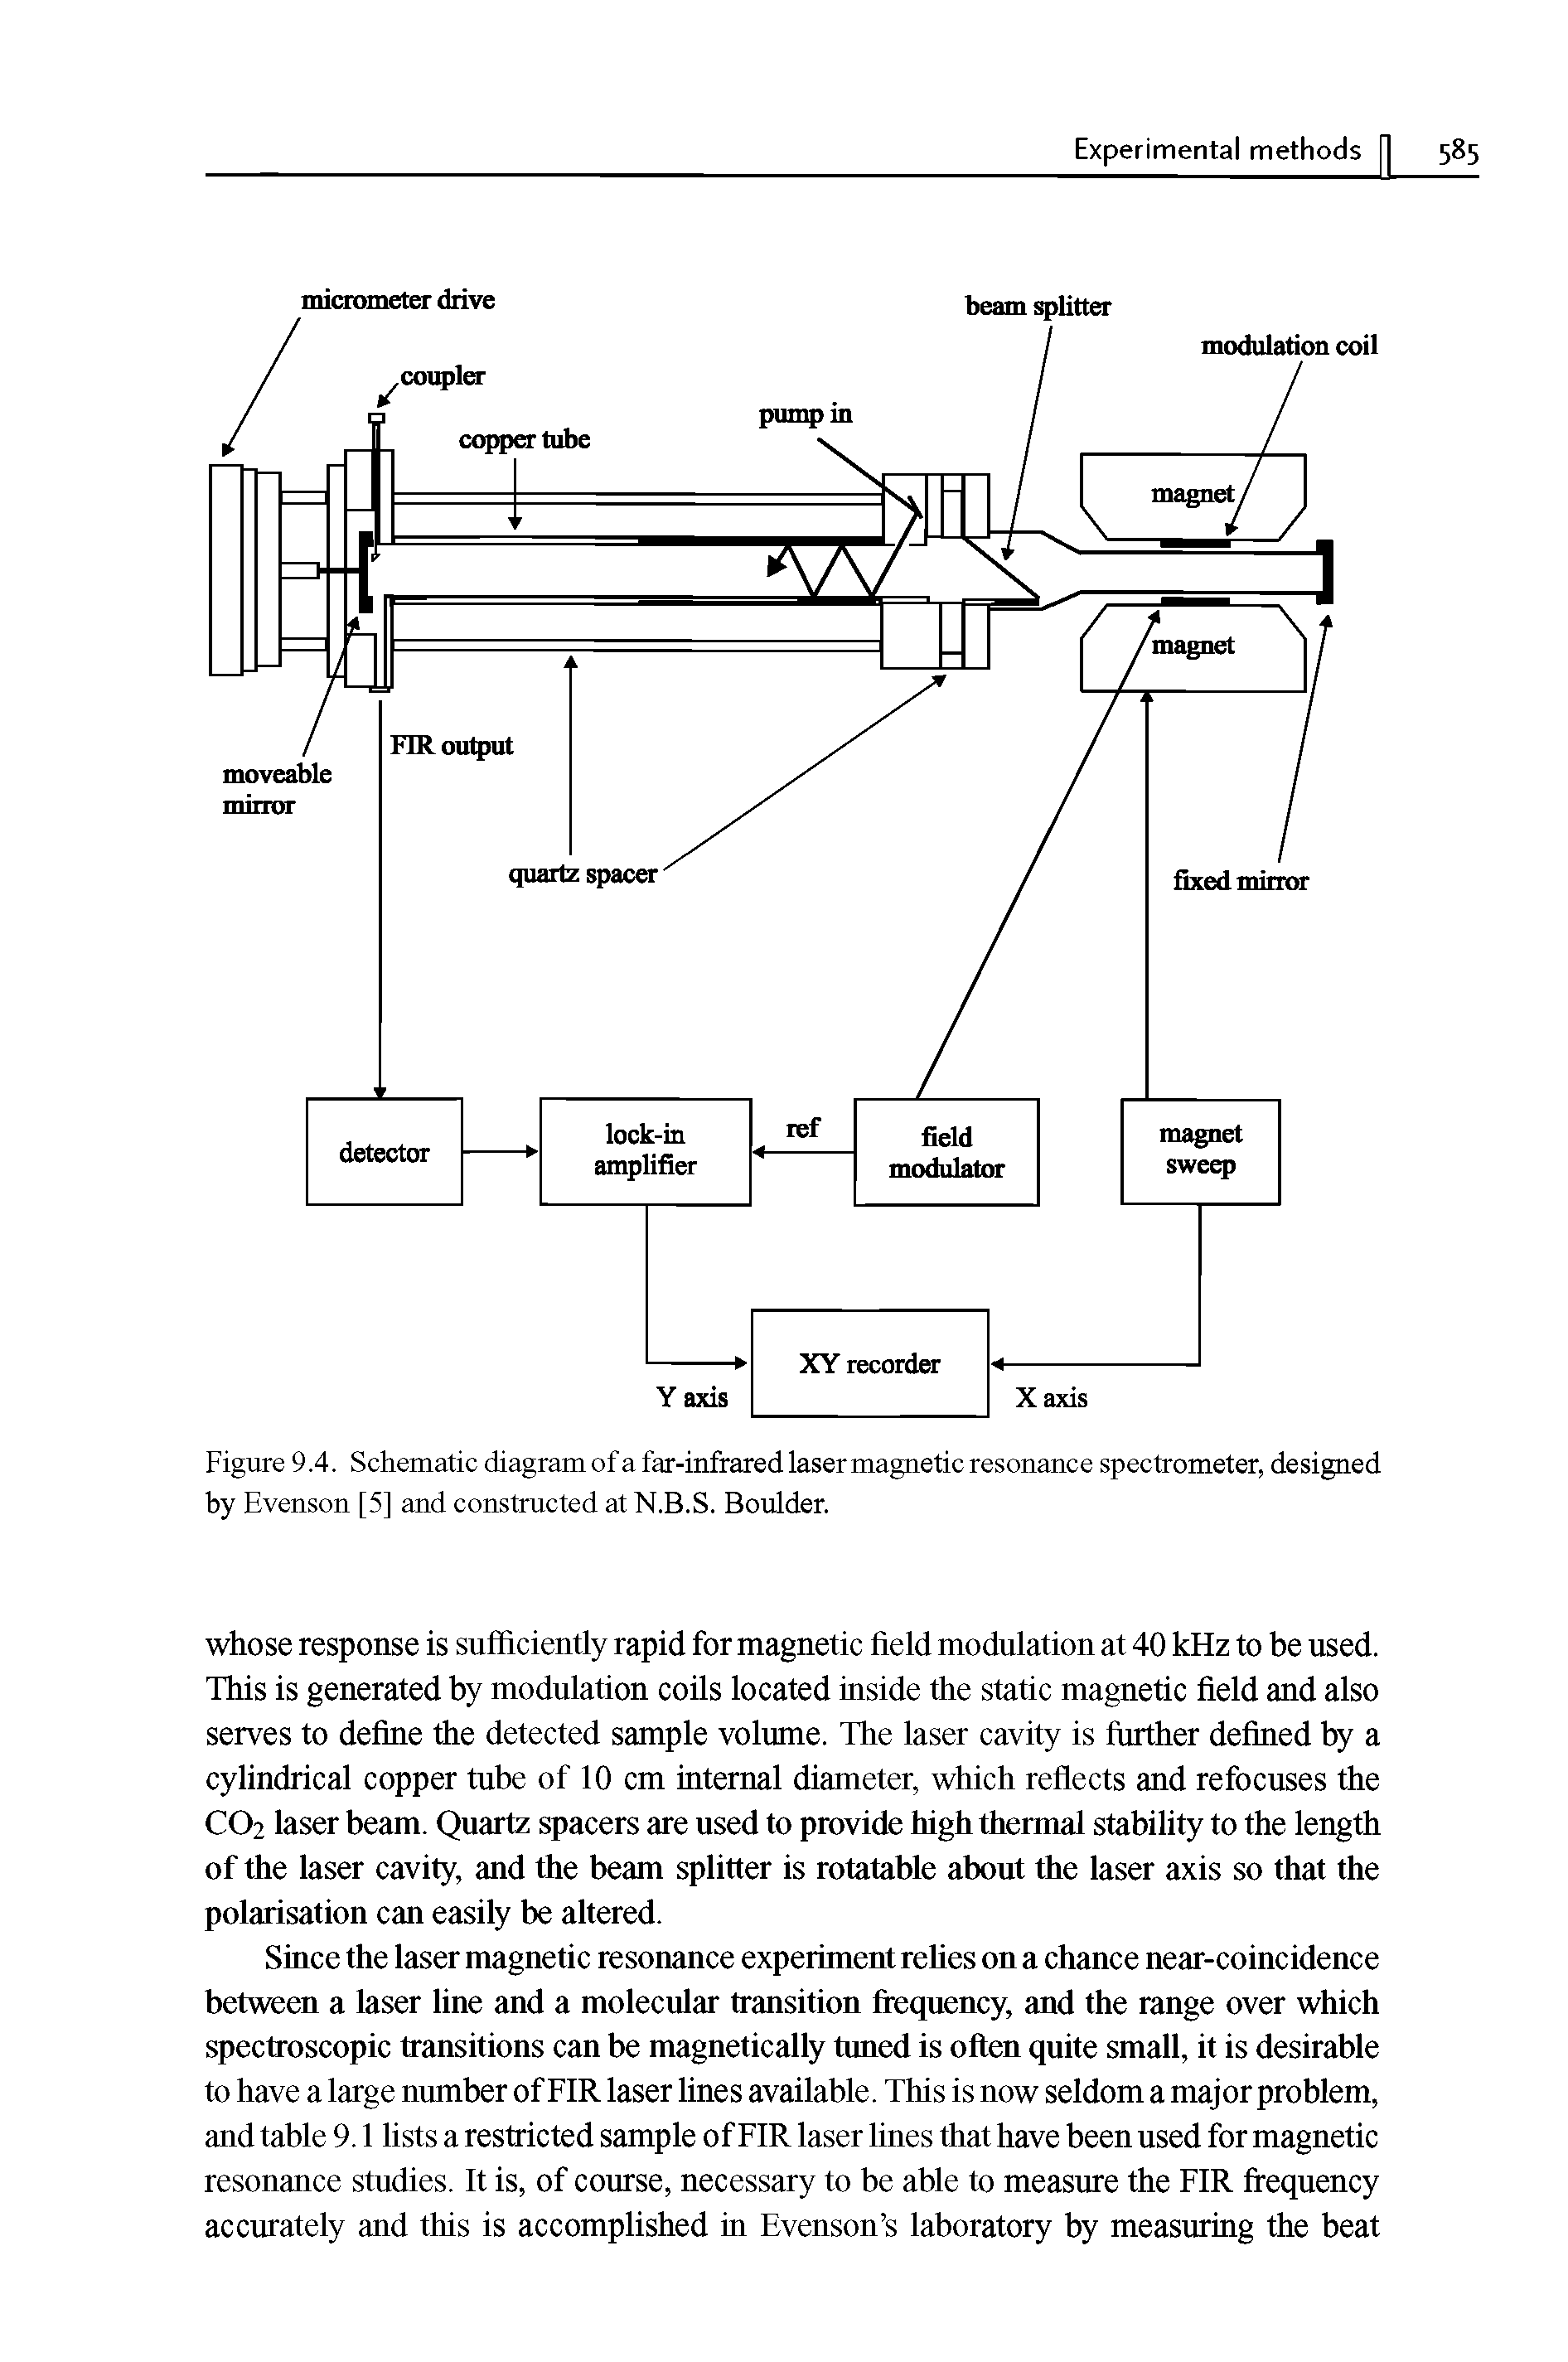 Figure 9.4. Schematic diagram of a far-infrared laser magnetic resonance spectrometer, designed by Evenson [5] and constructed at N.B.S. Boulder.